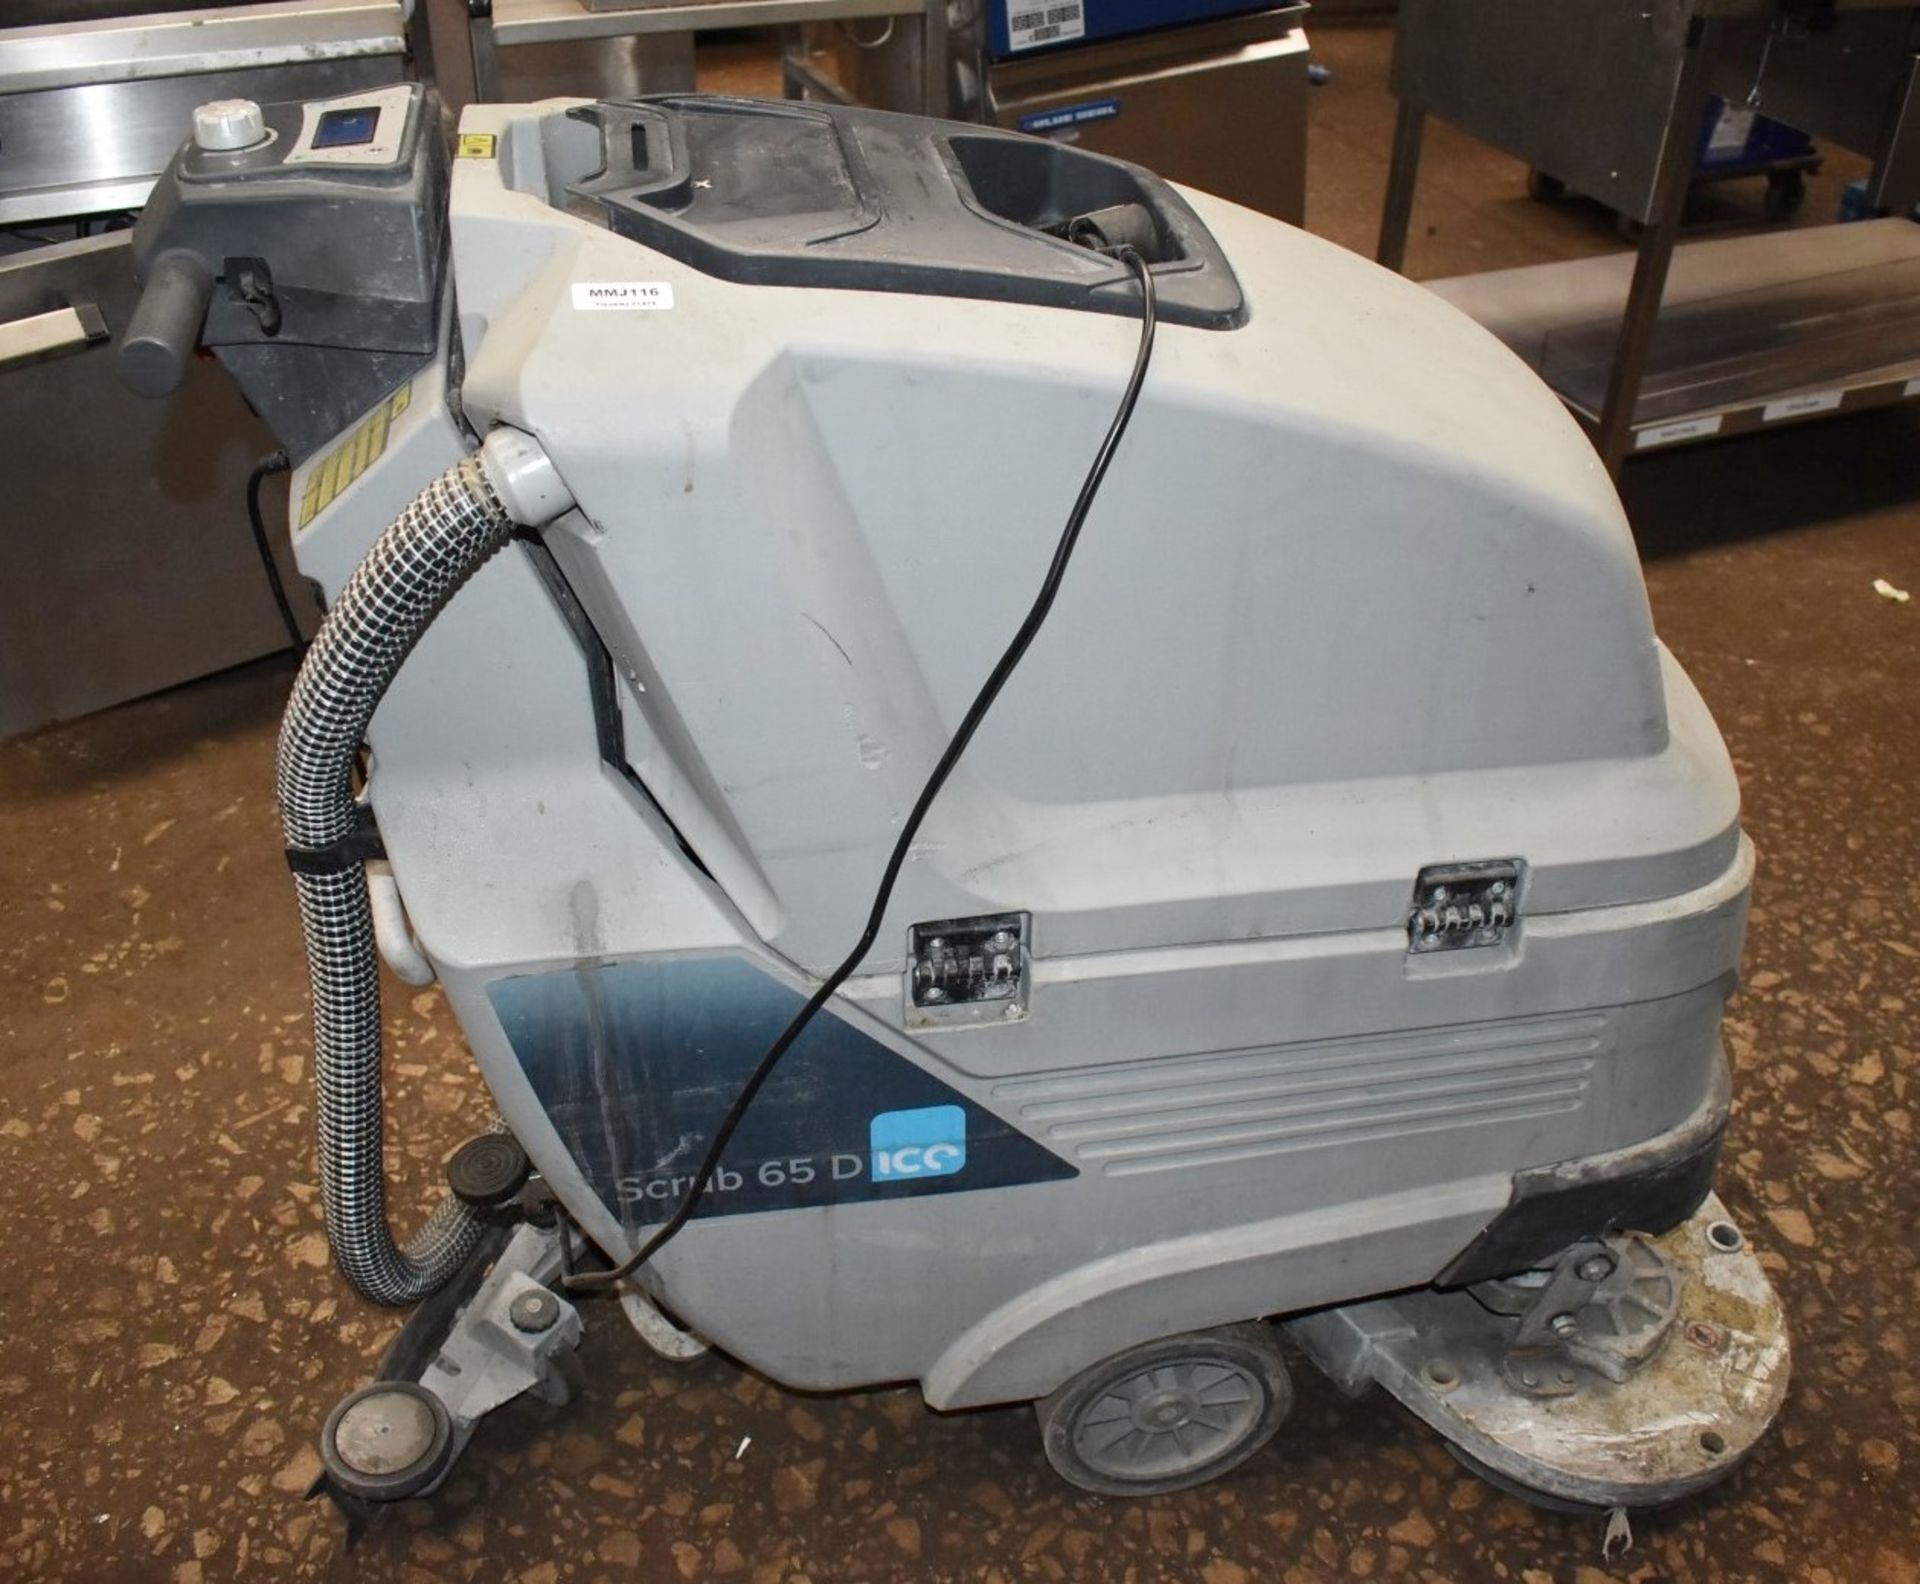 1 x Ice Scrub 65D Commercial Floor Scrubber Dryer - Recently Removed From a Supermarket - Image 2 of 16